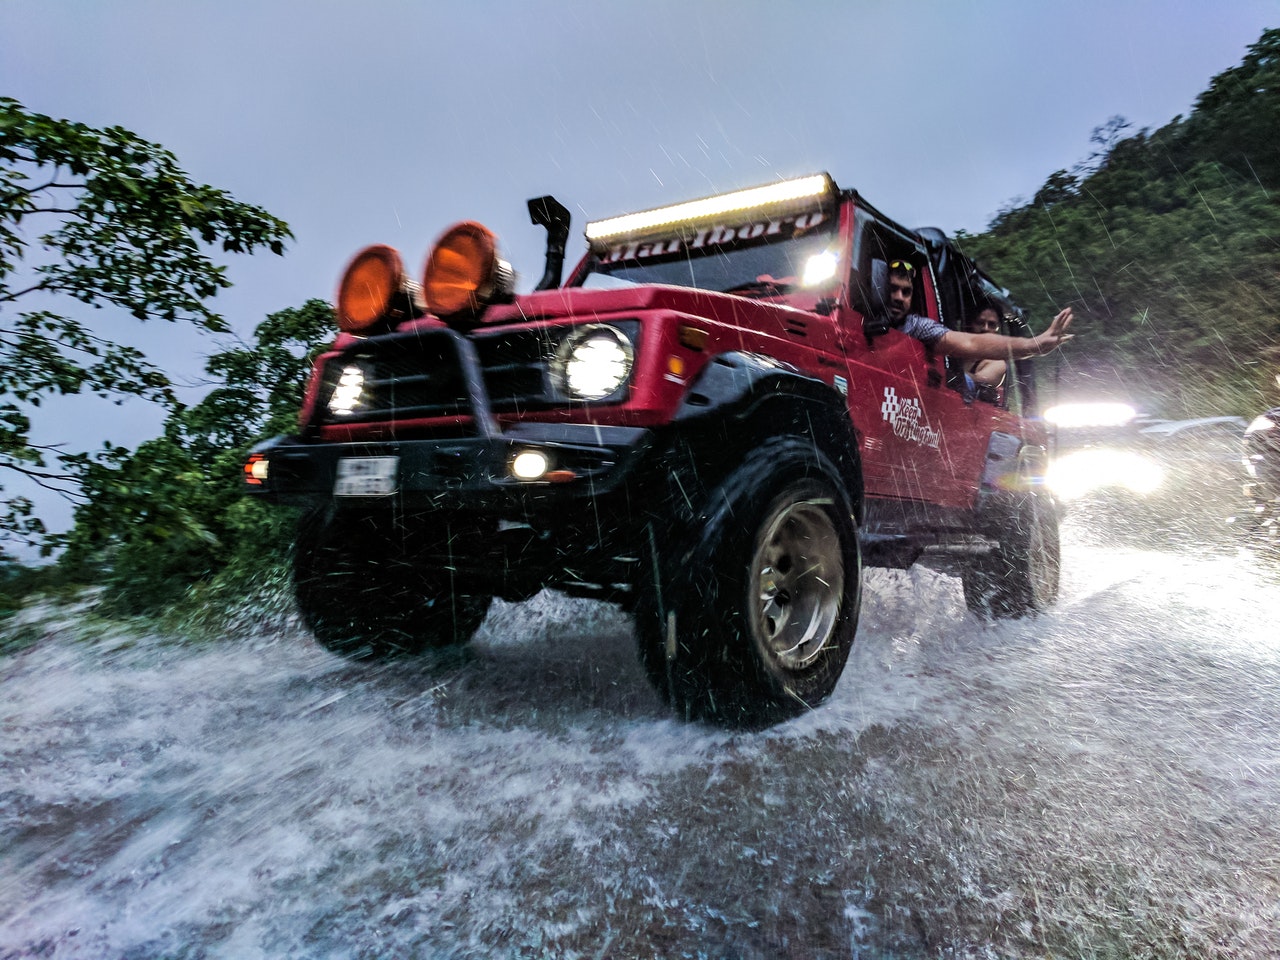 Digital nomads driving through storm in their offroad overlanding Jeep